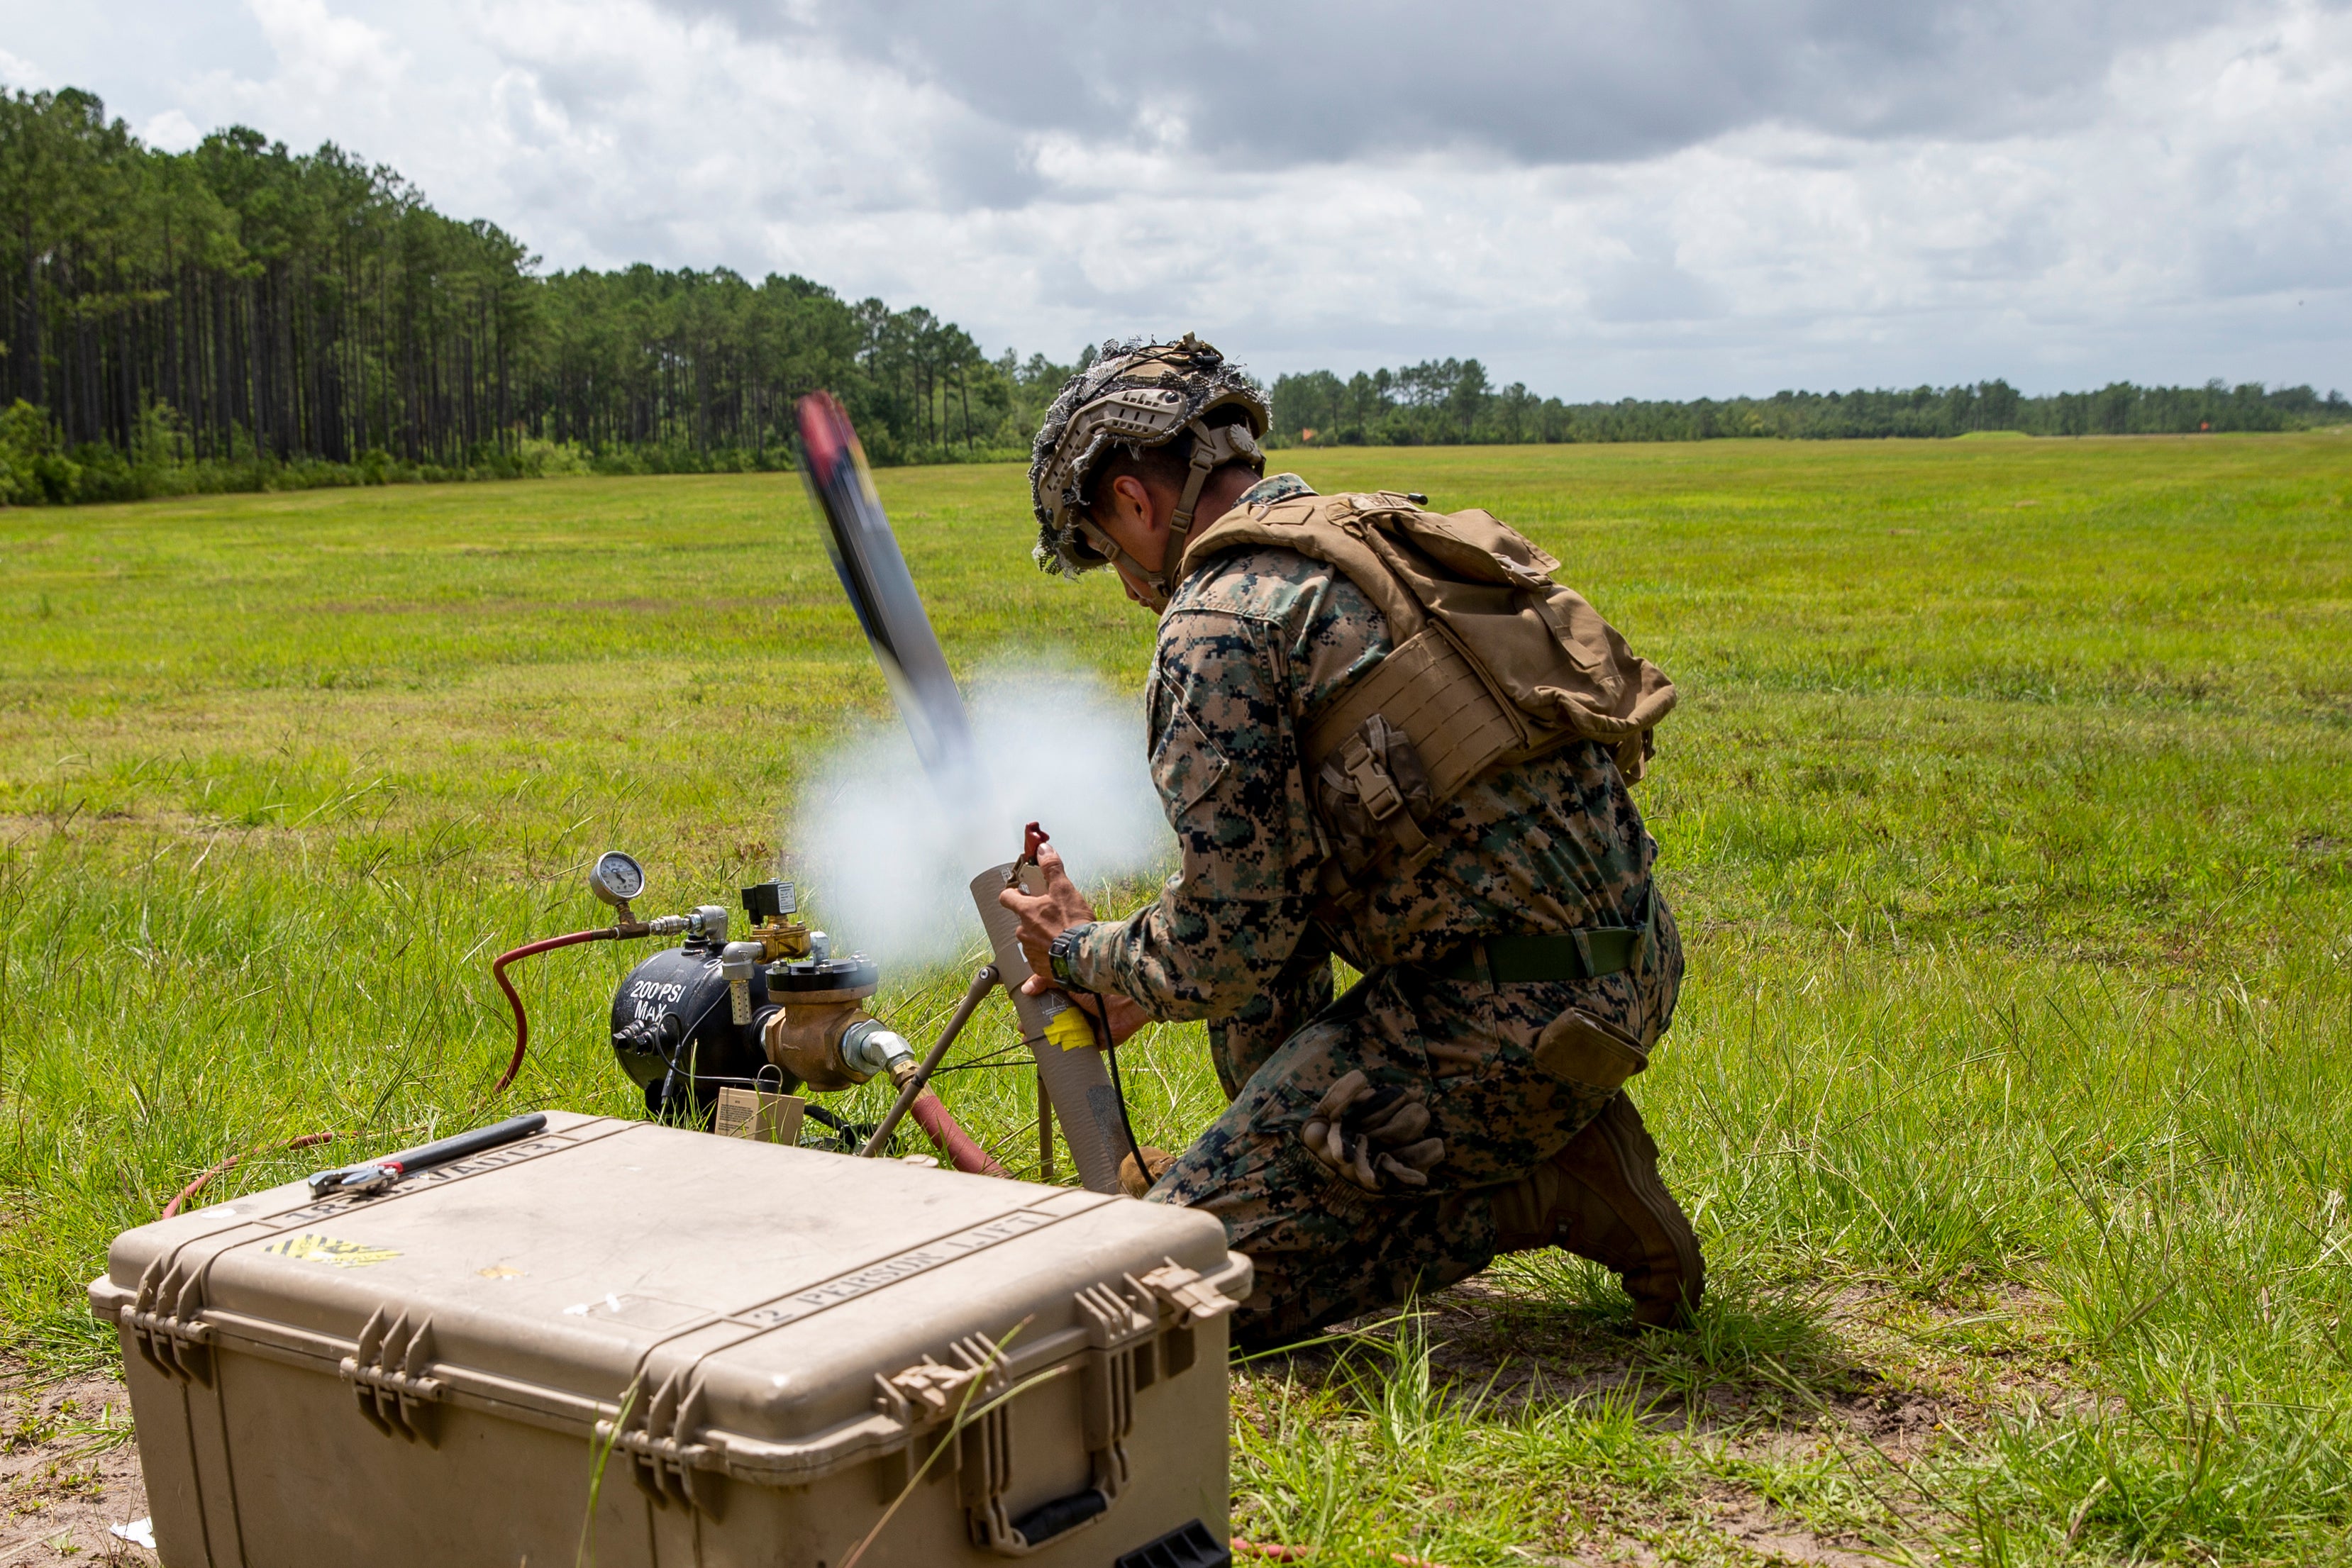 A Switchblade drone is launched during a training  exercise at Camp Lejeune, North Carolina on July 7, 2021. (Photo: DVIDS / U.S. Marine Corps photo by Pfc. Sarah Pysher)